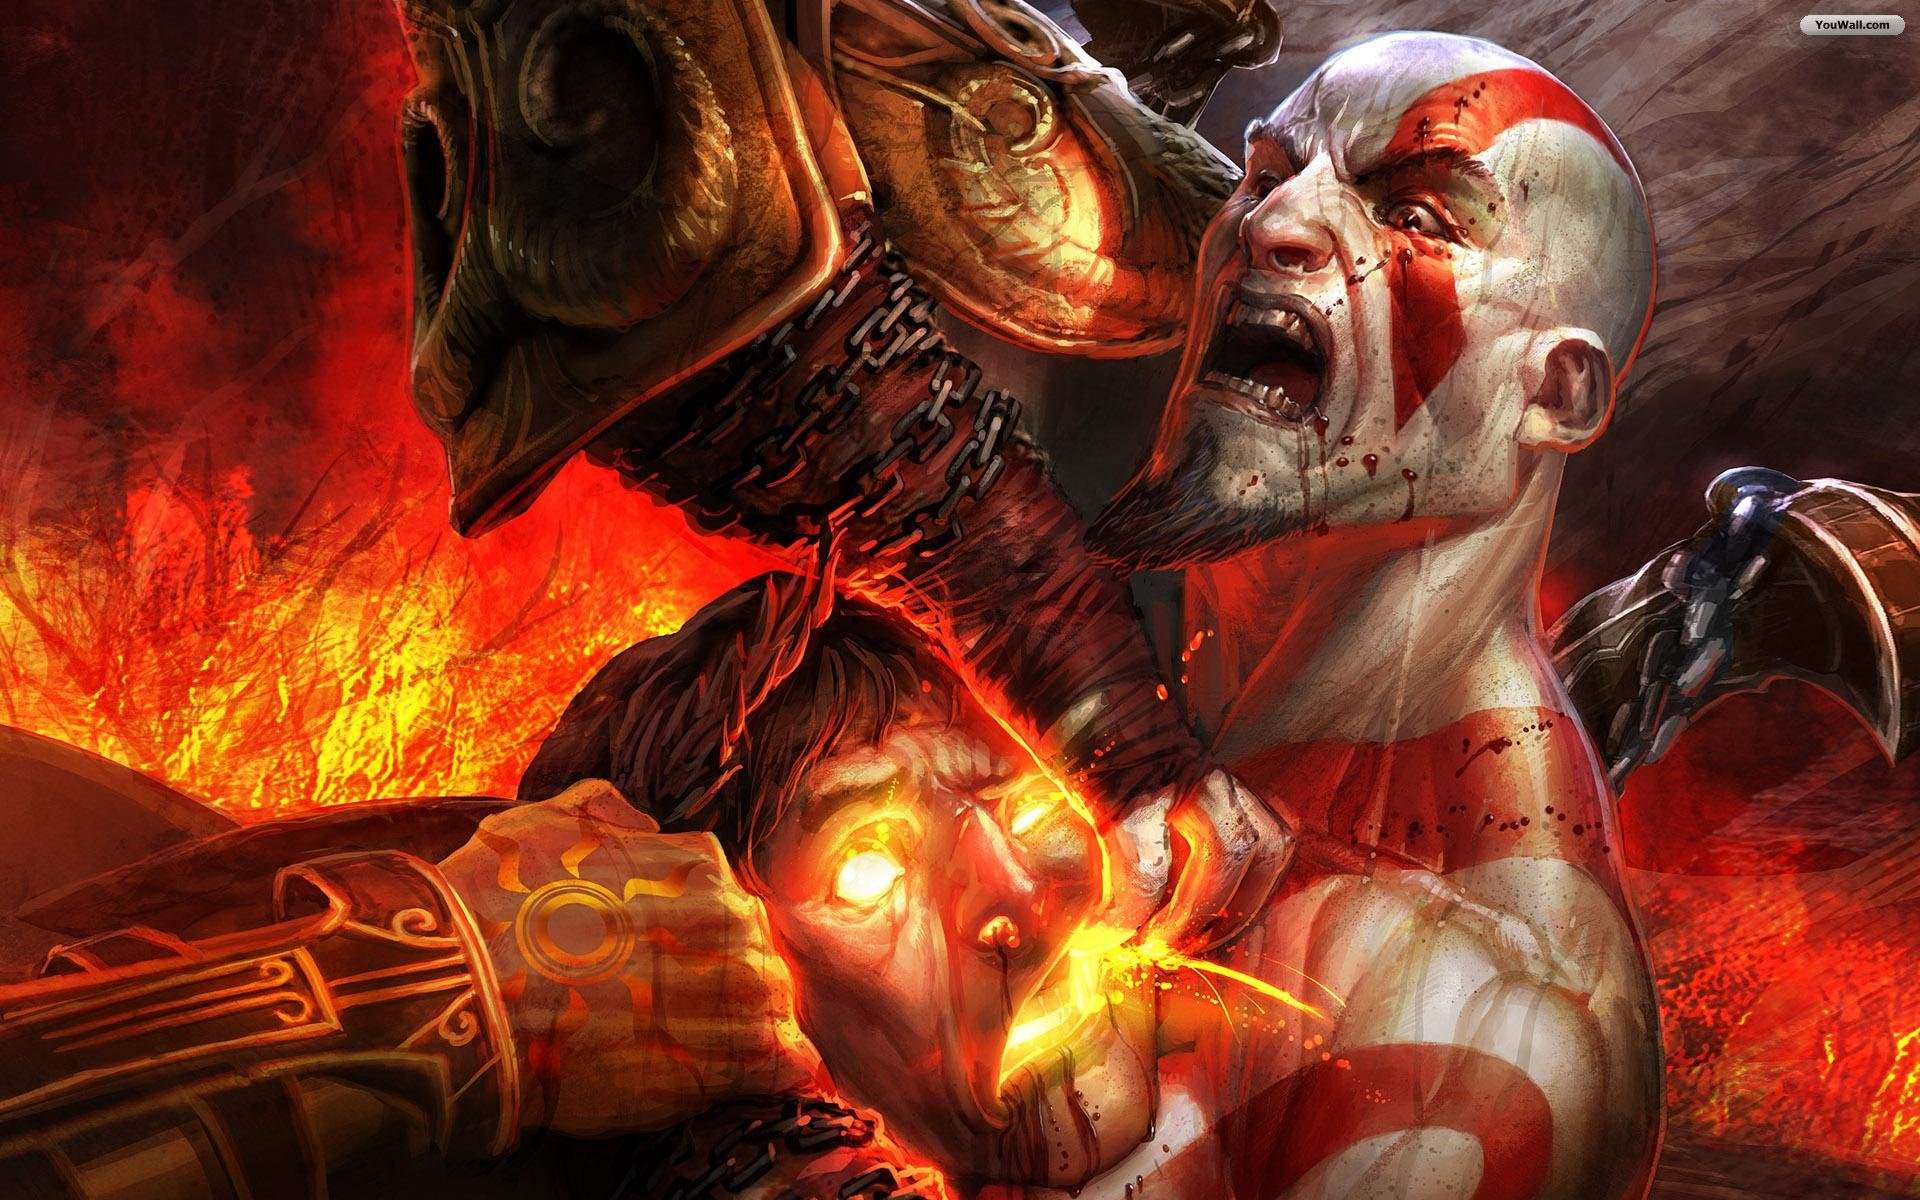 God of War III Remastered: Watch The New Gameplay On PS4 Running